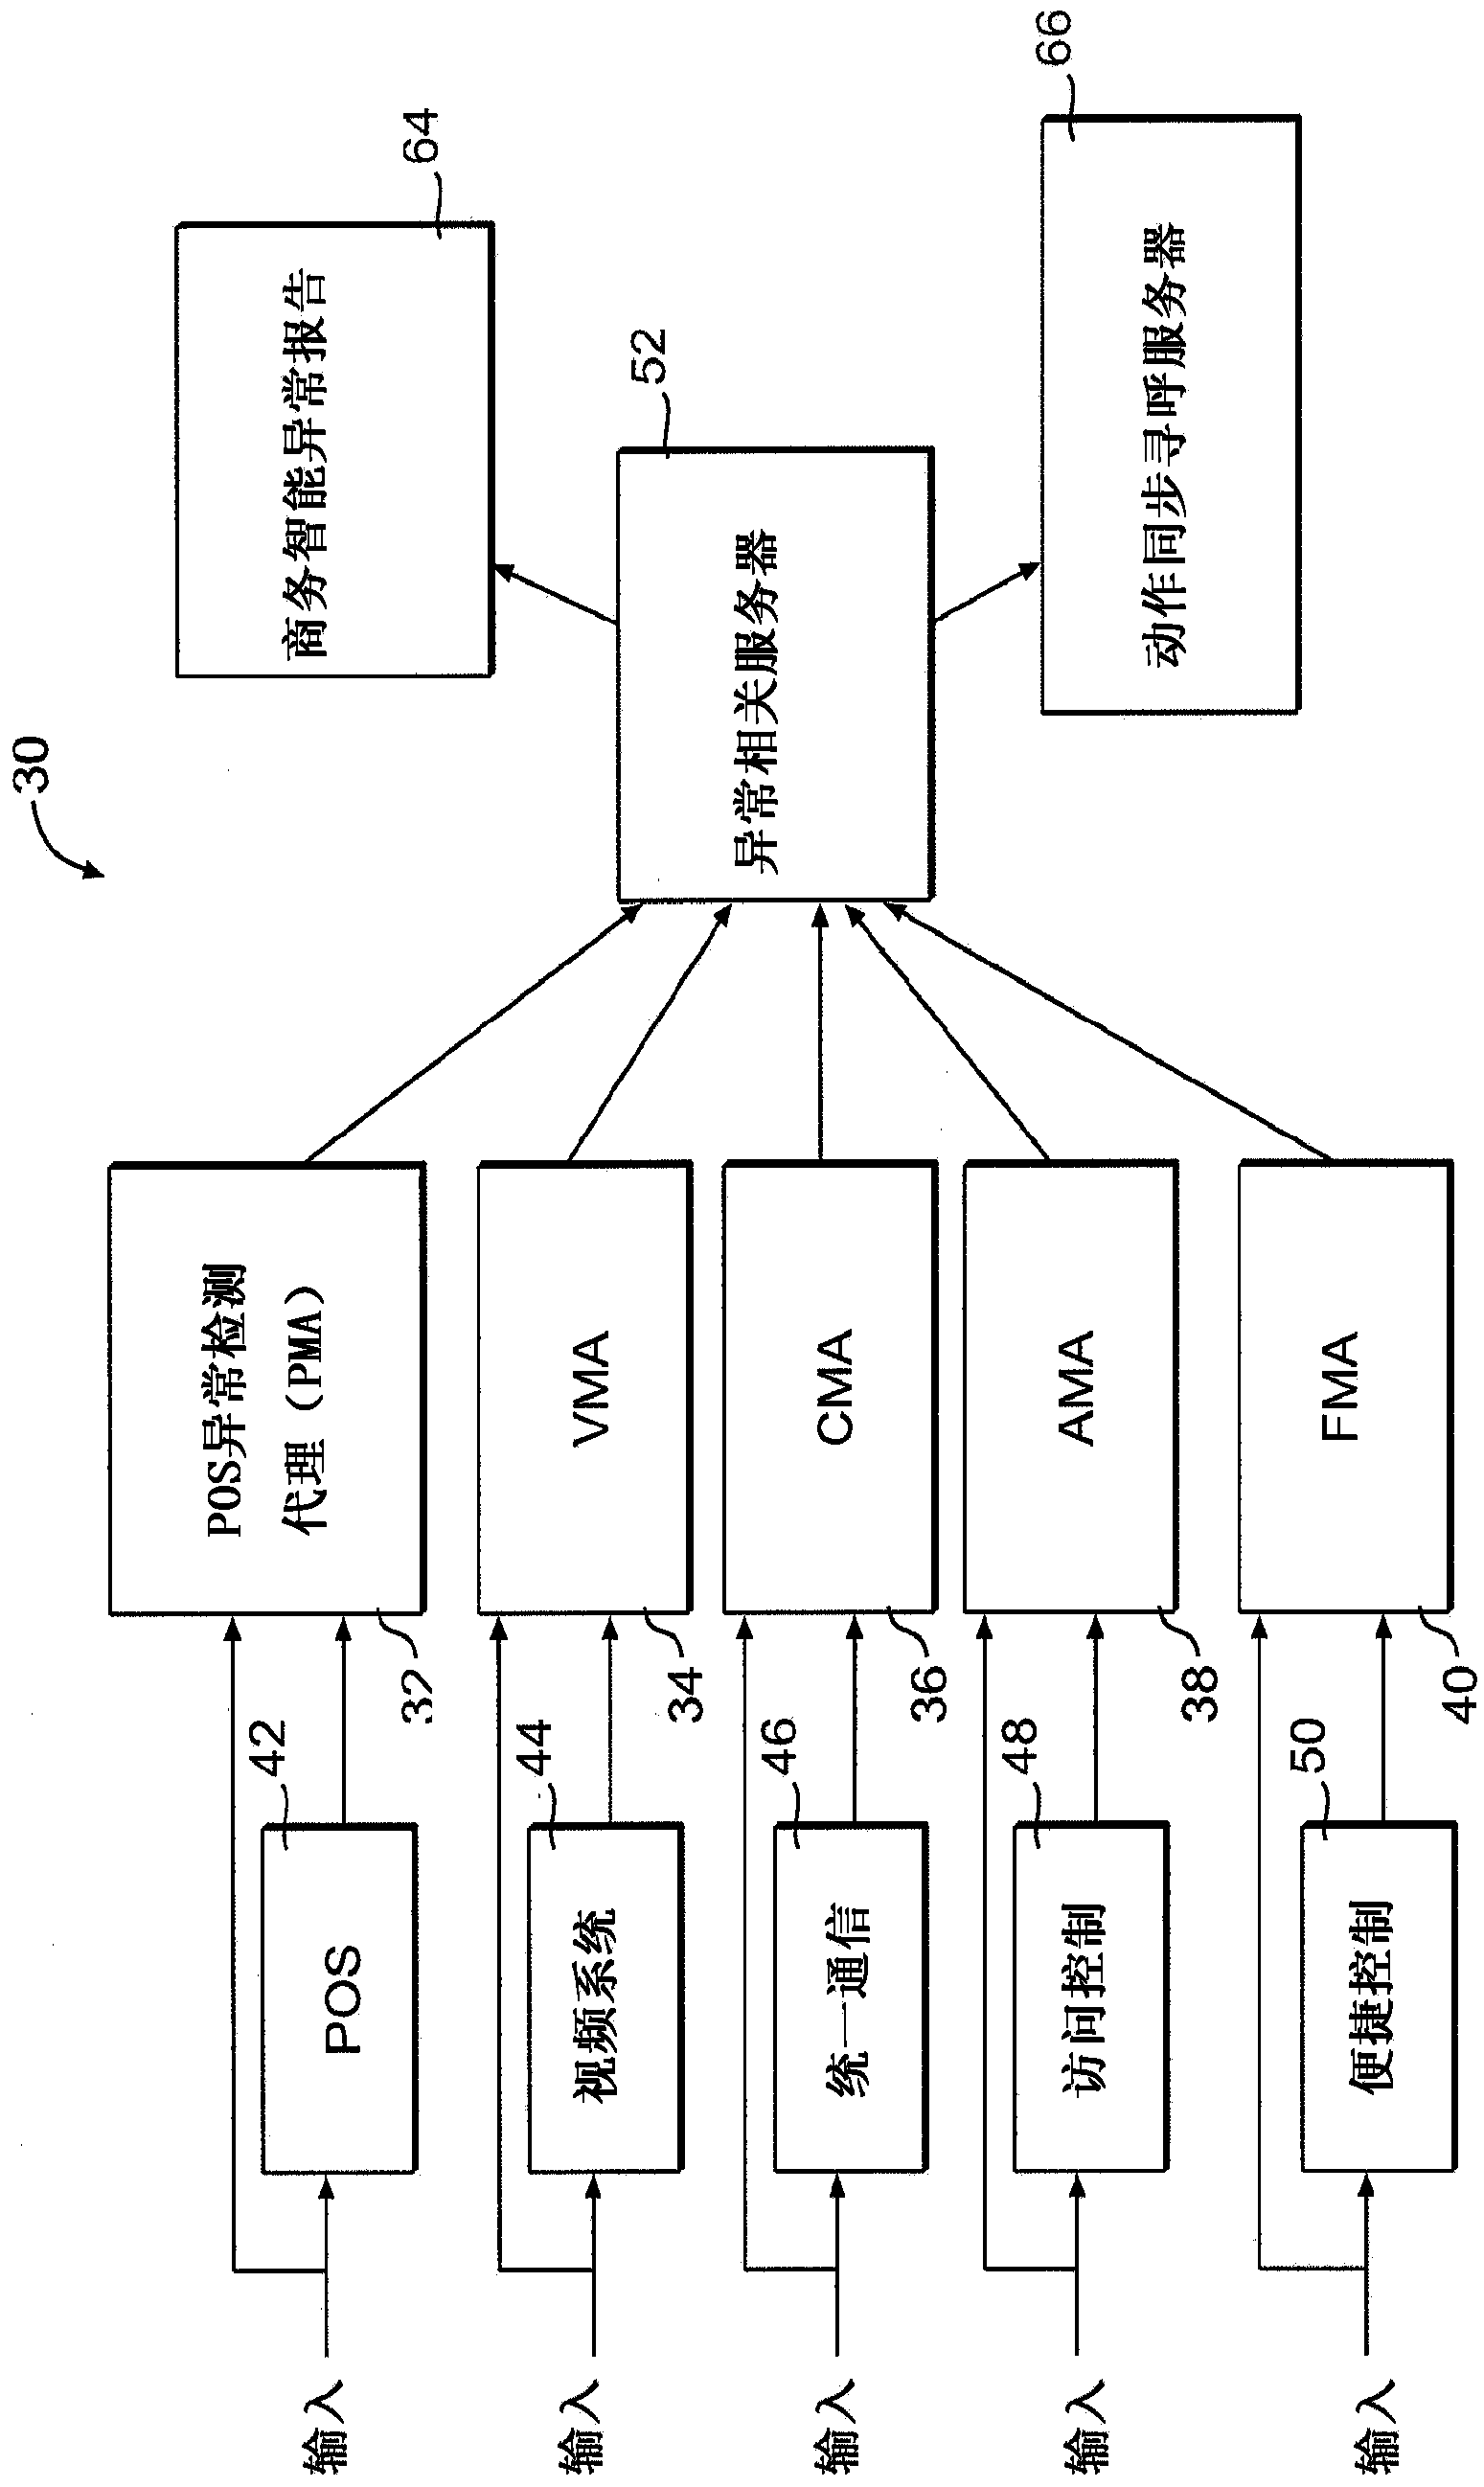 System and method for site abnormality recording and notification